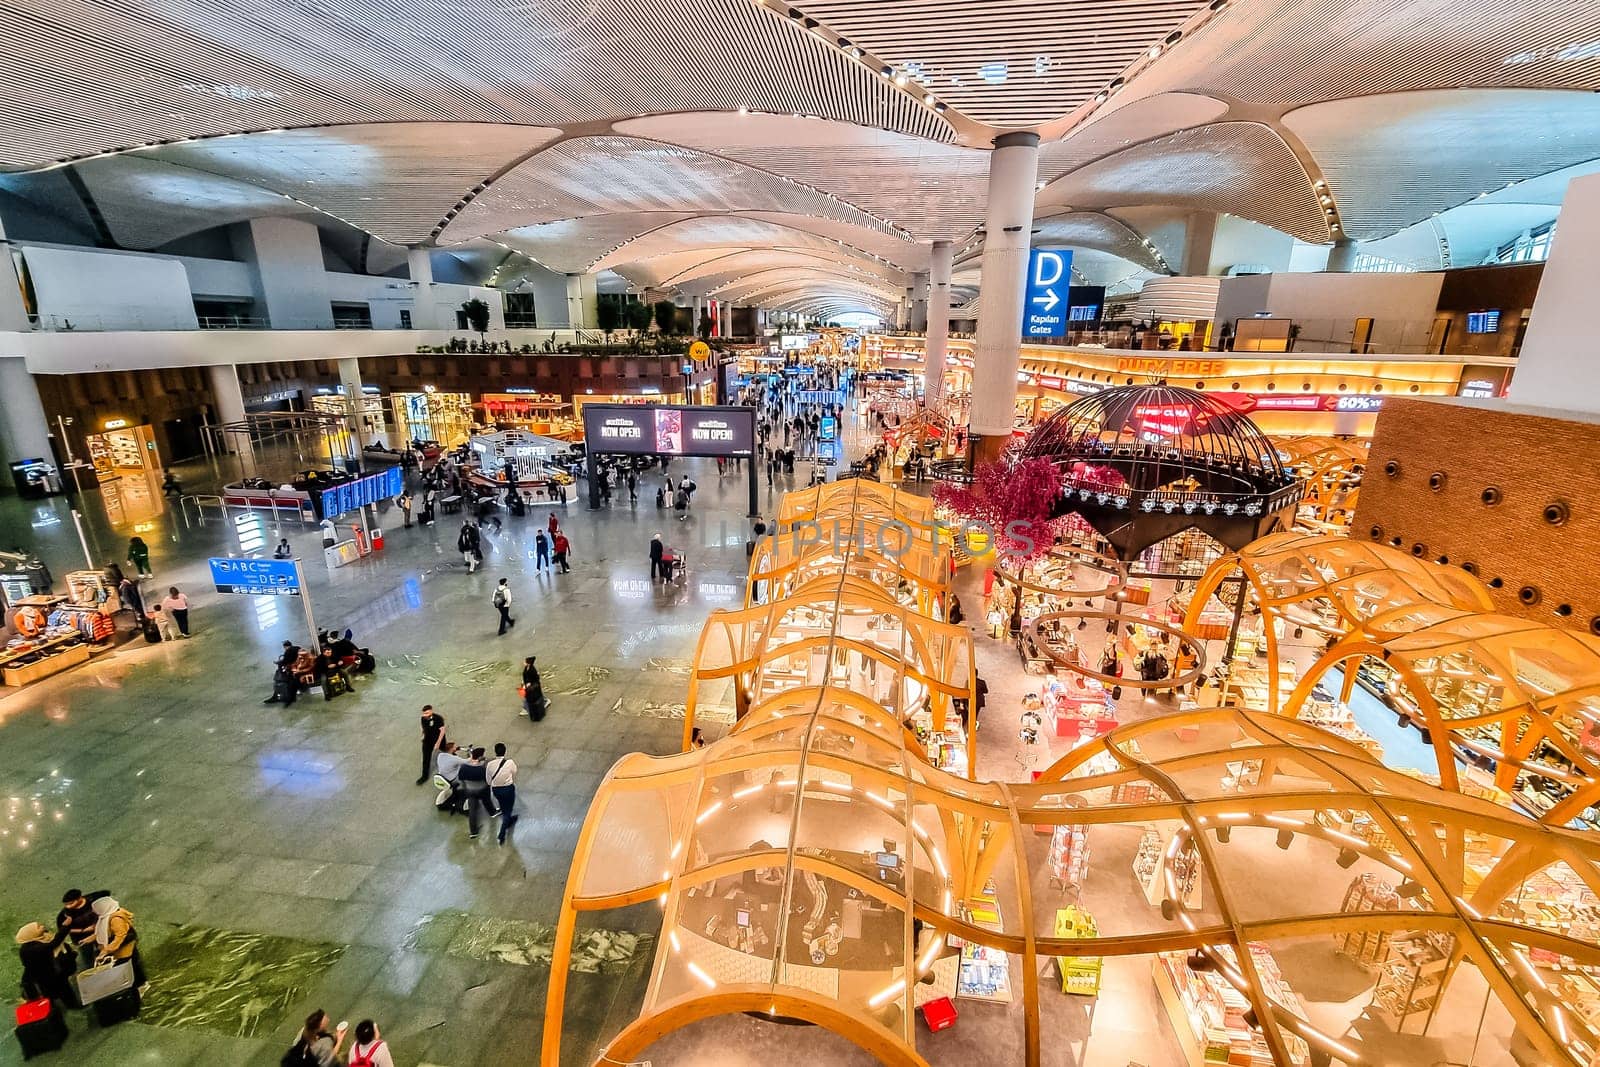 New Istanbul airport (IST) large shopping and departure area view by xbrchx